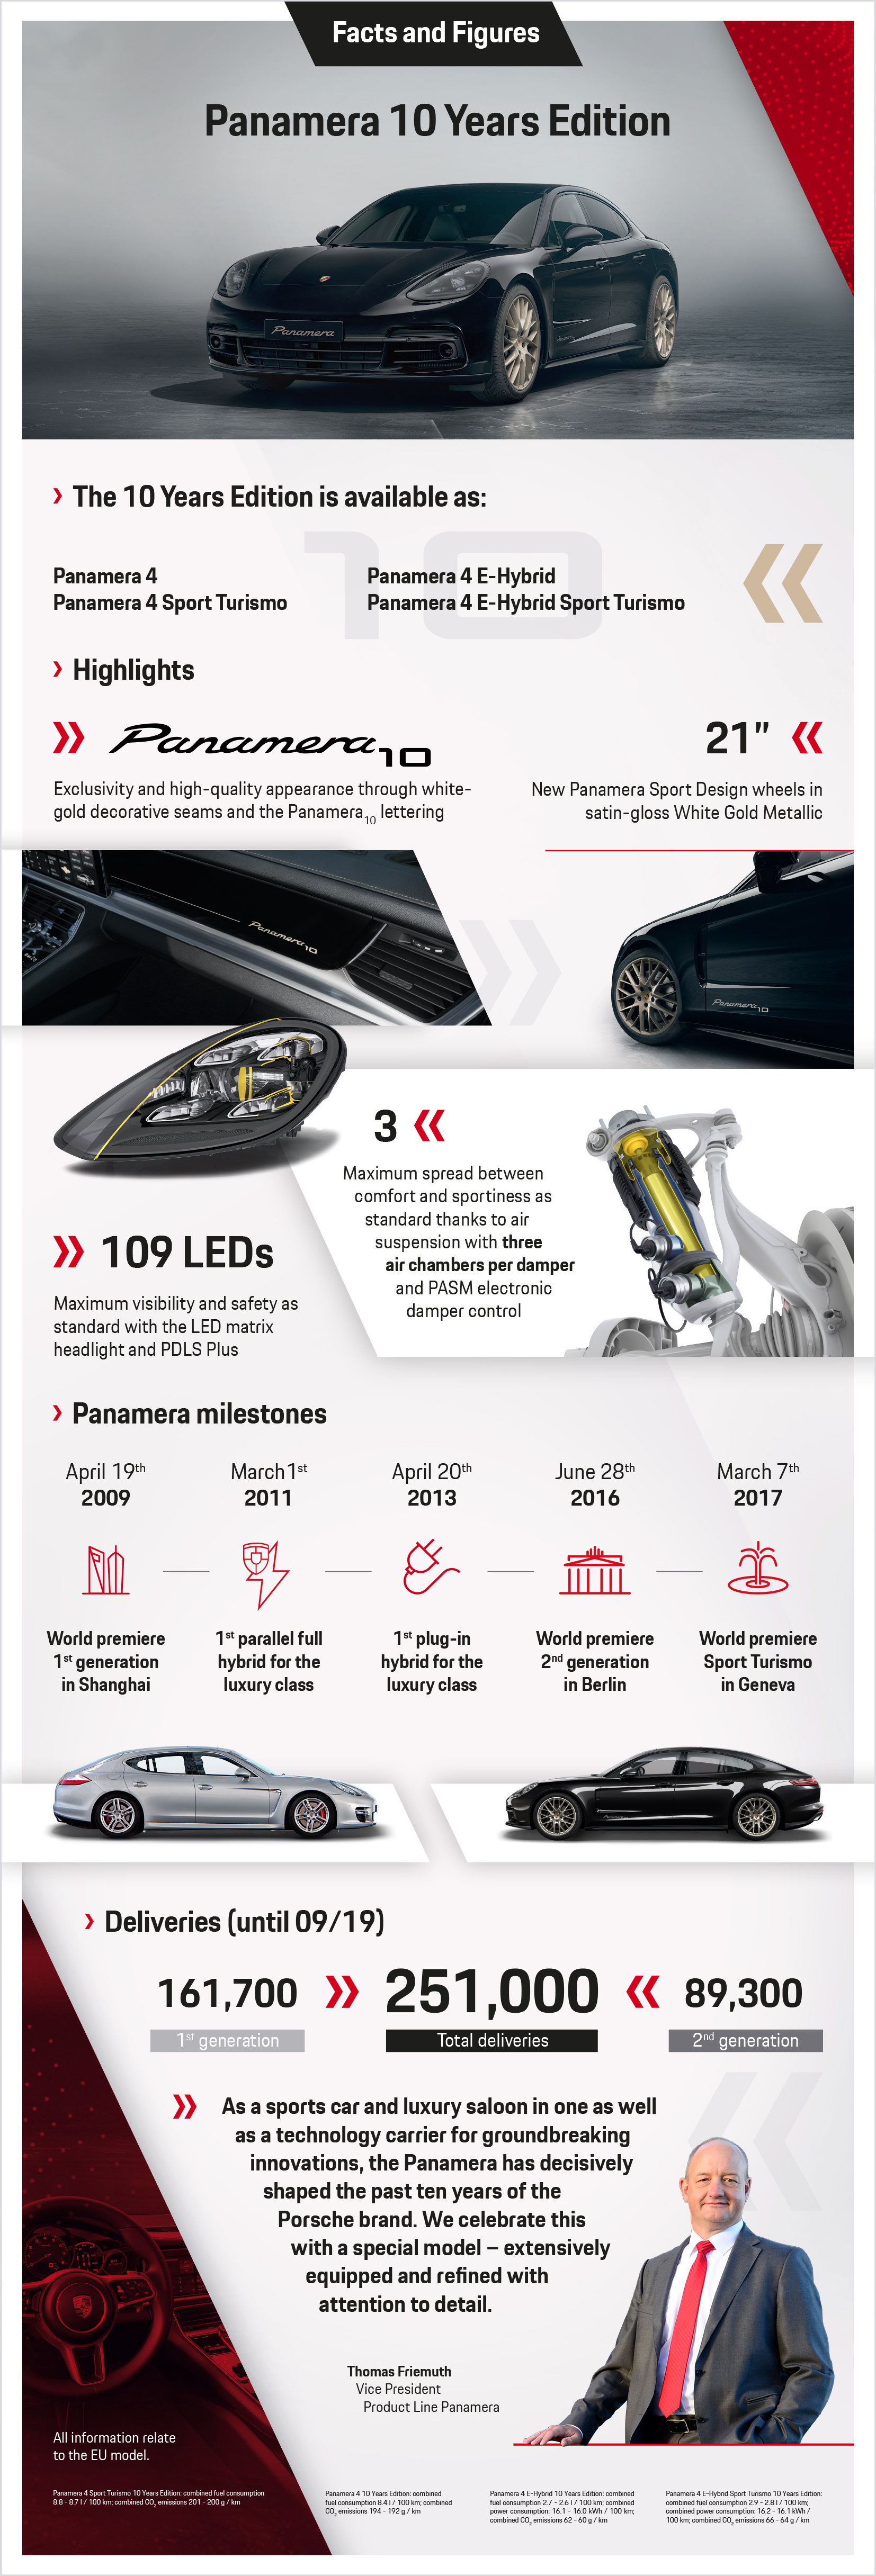 Panamera 10 Years Edition, Infographic, 2019, Porsche AG